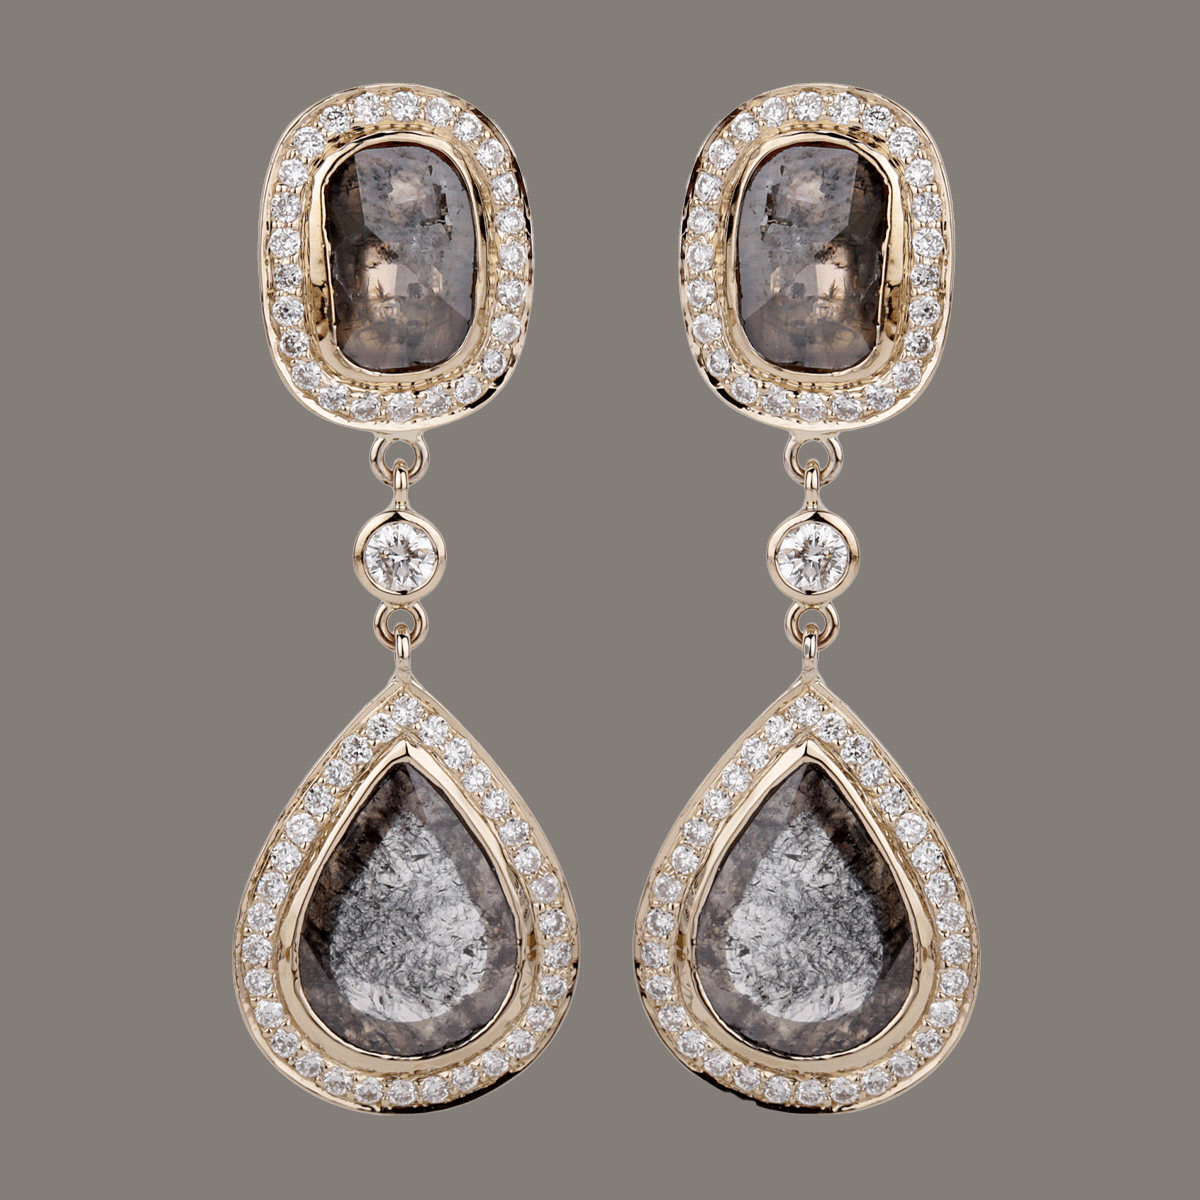 Earrings made of 750 yellow gold with a diamond disc